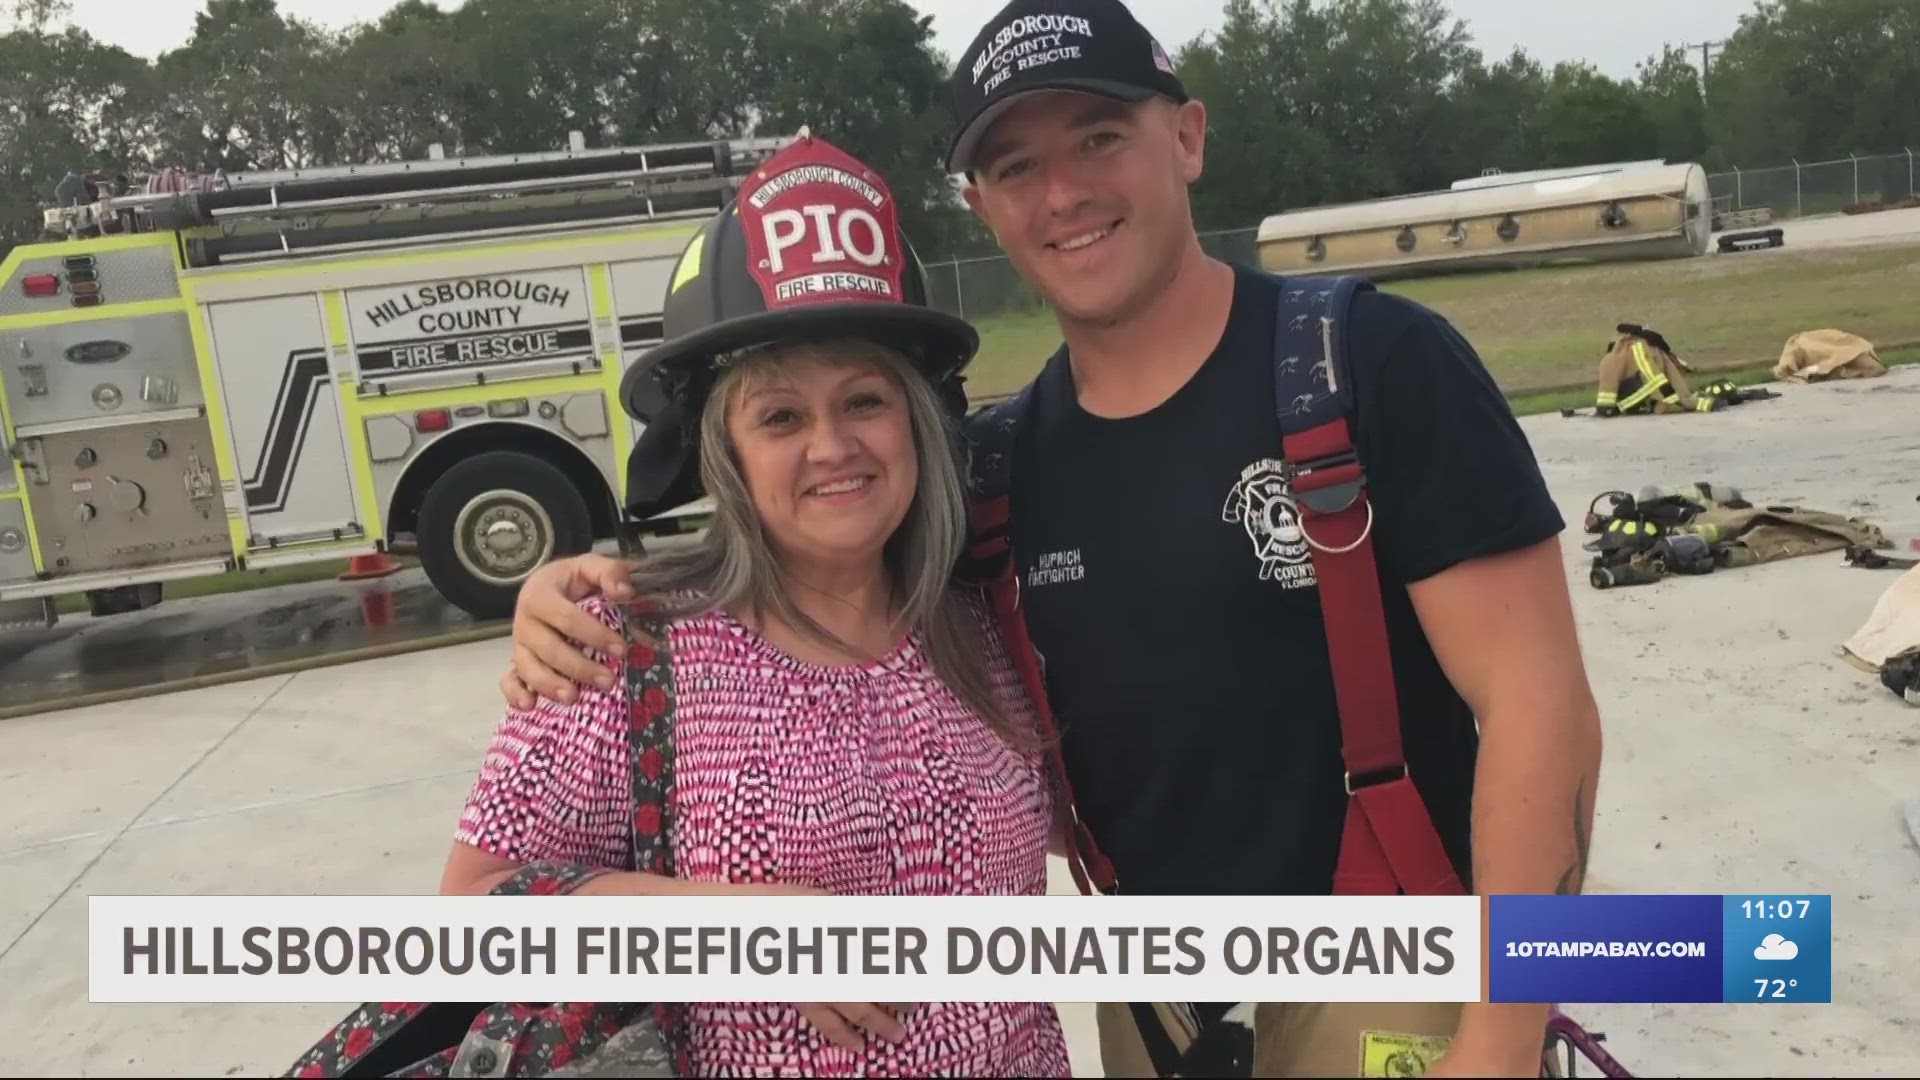 Jerrad Huprich's mother, Jane, said organ donation was something he was passionate about.